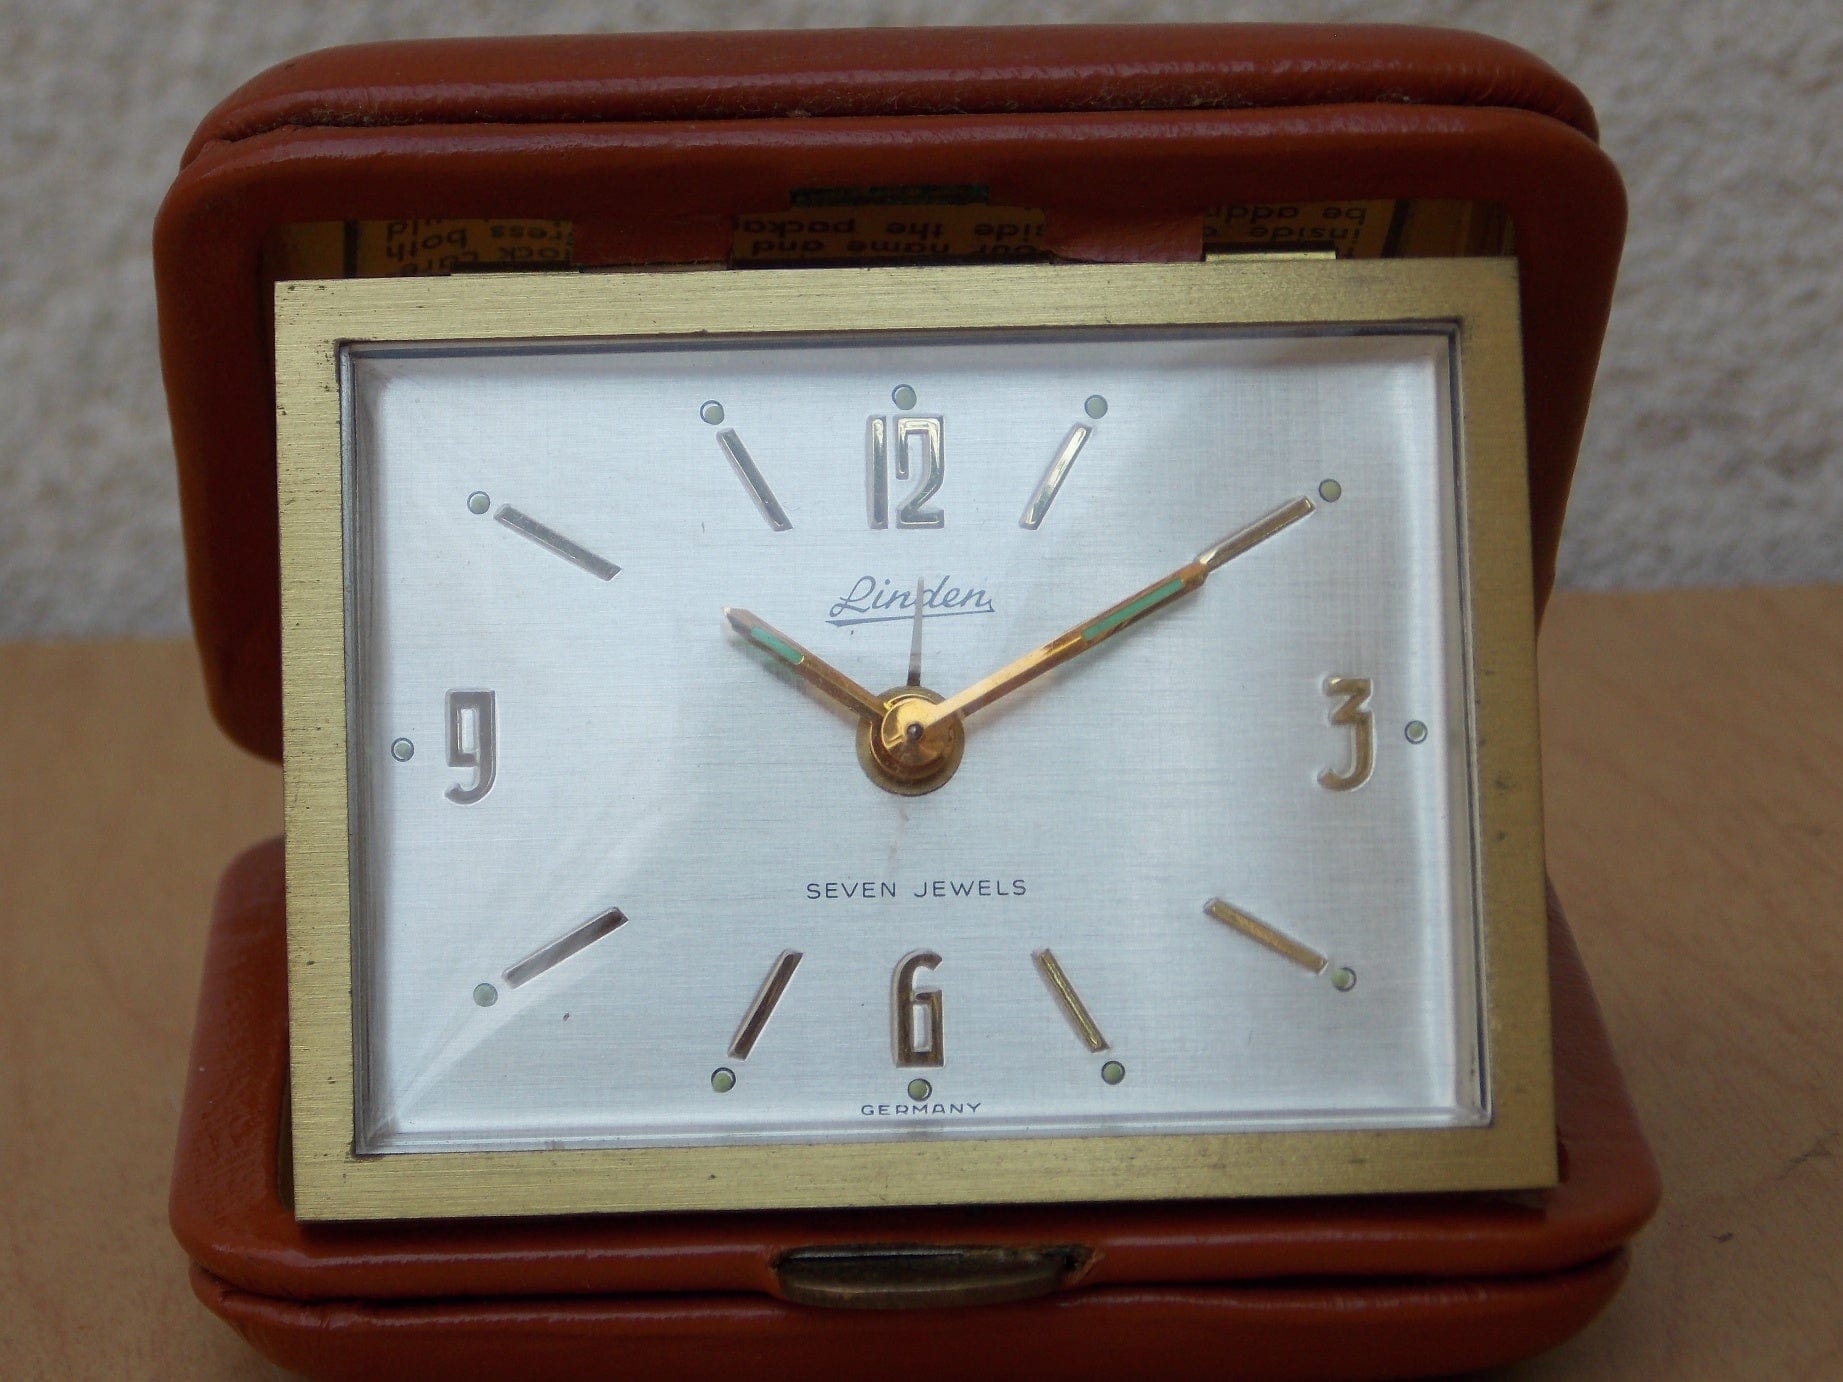 I Like Mike's Mid Century Modern Clock Linden Brass Brown Leather Travel Clock, Wind Up, 7 Jewels